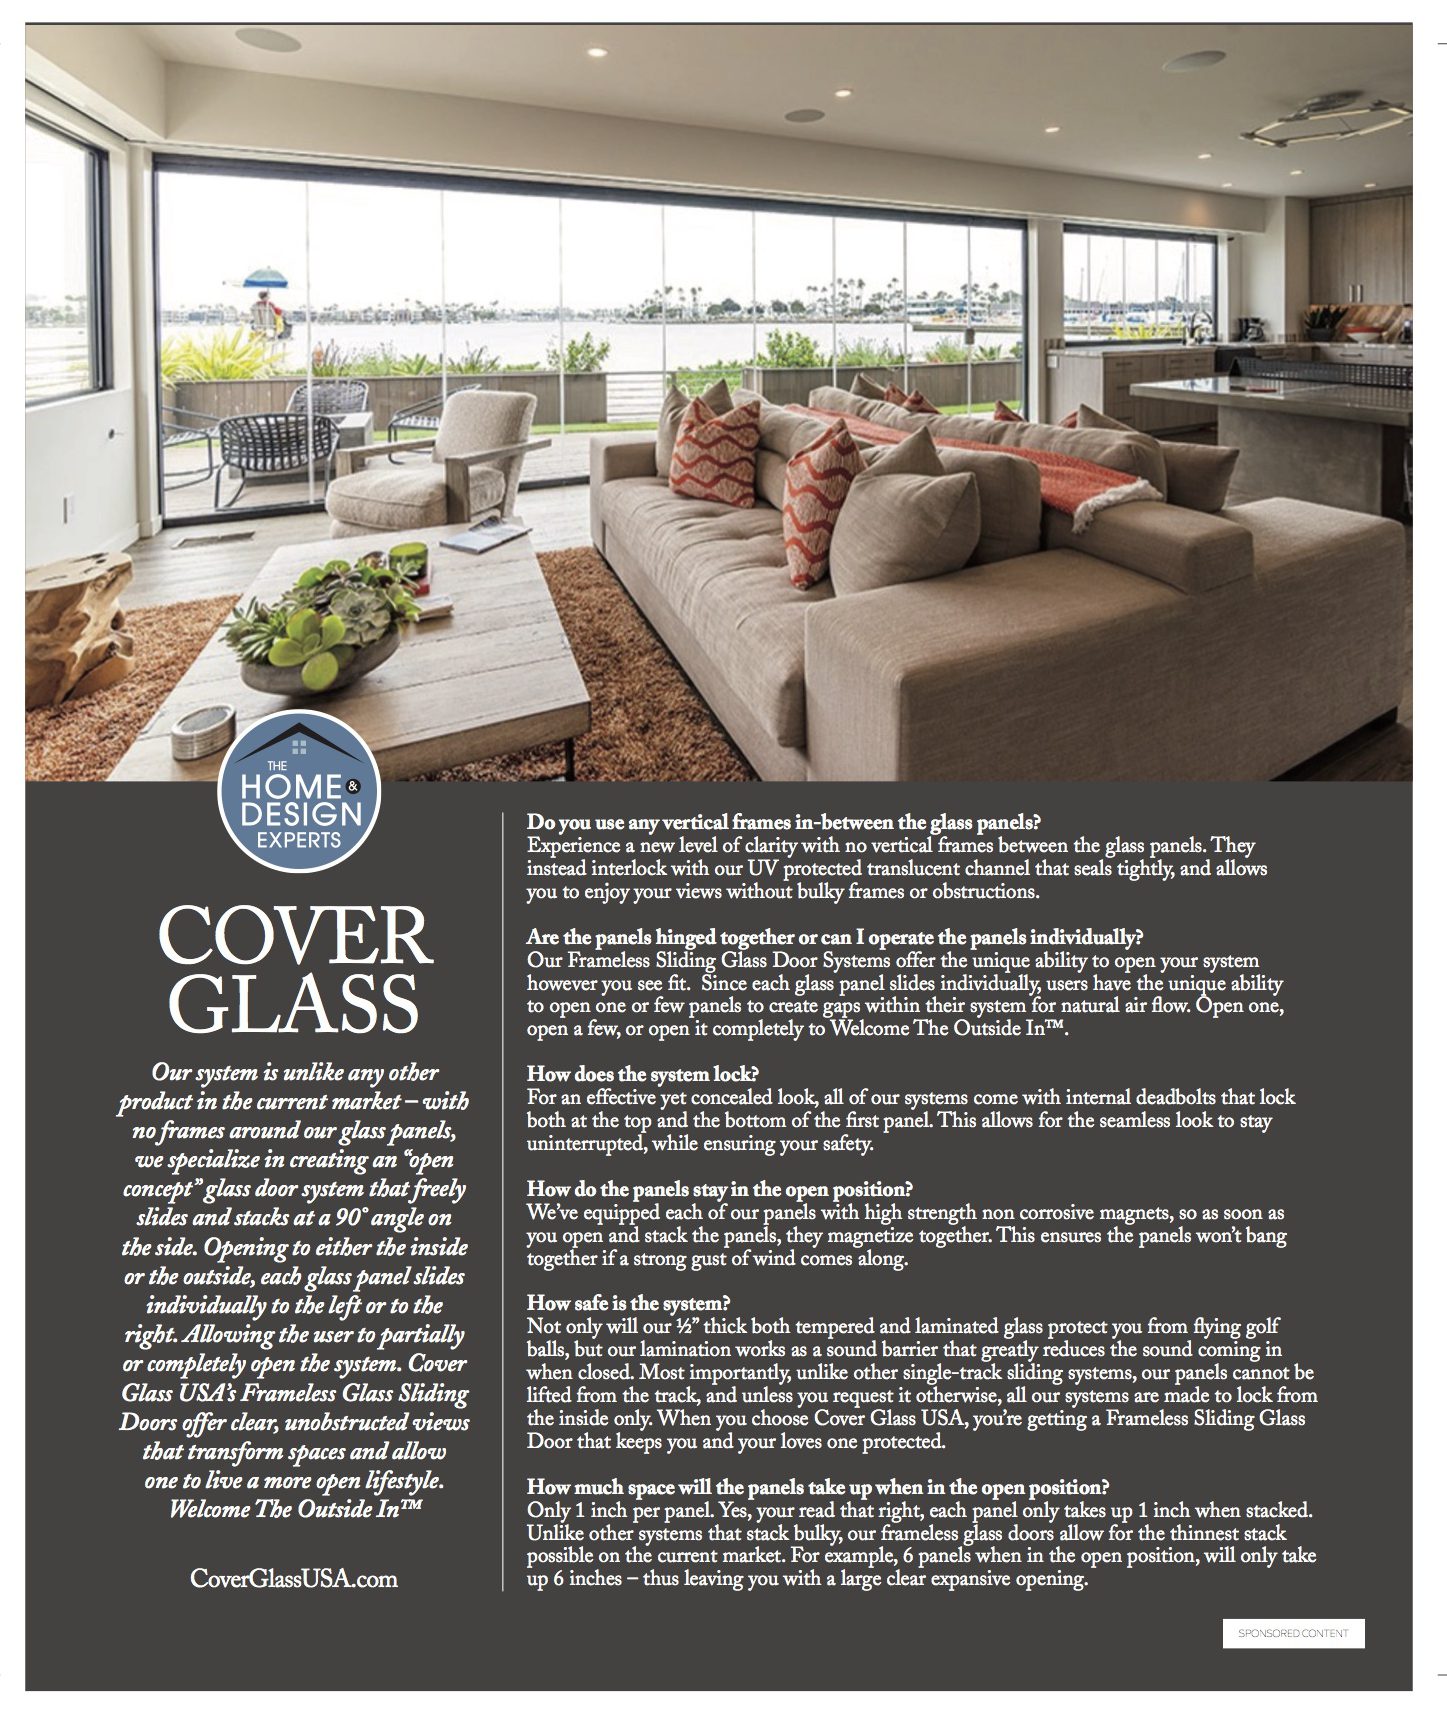 Cover Glass Sponsored Content